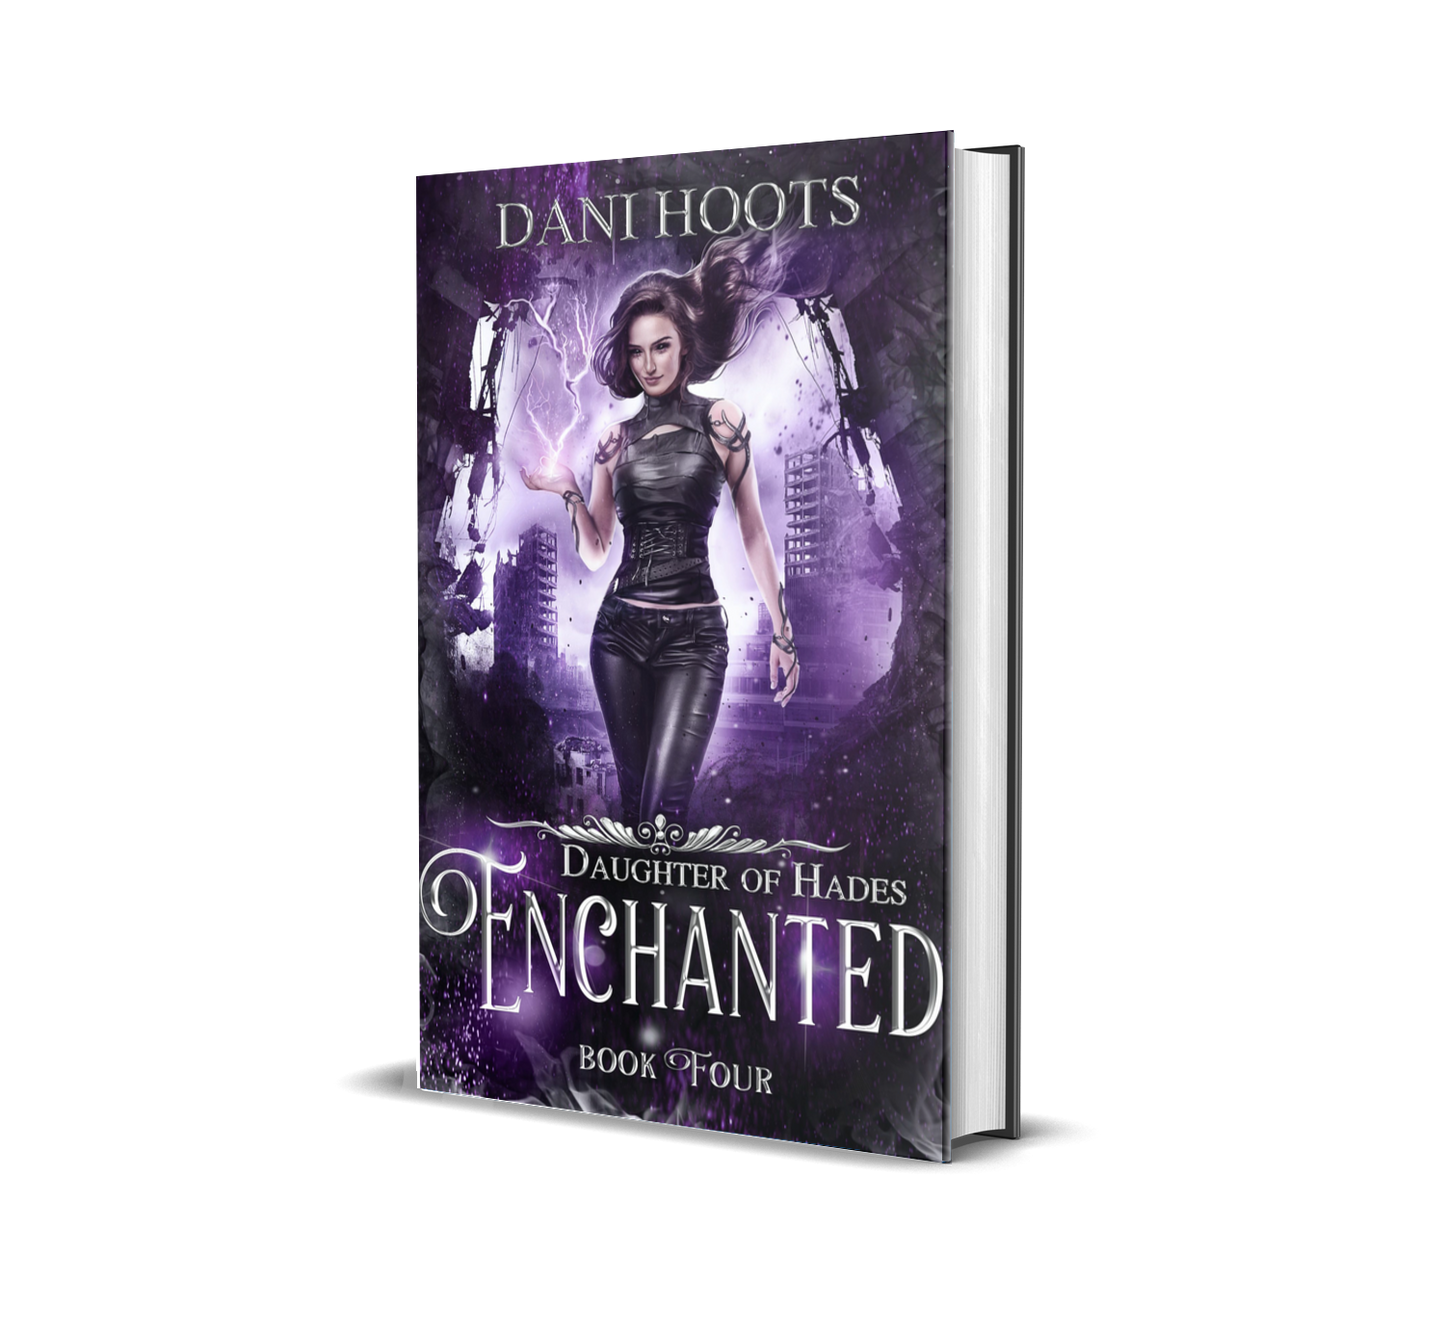 Enchanted (Daughter of Hades, Book 4) hardcover — SIGNED